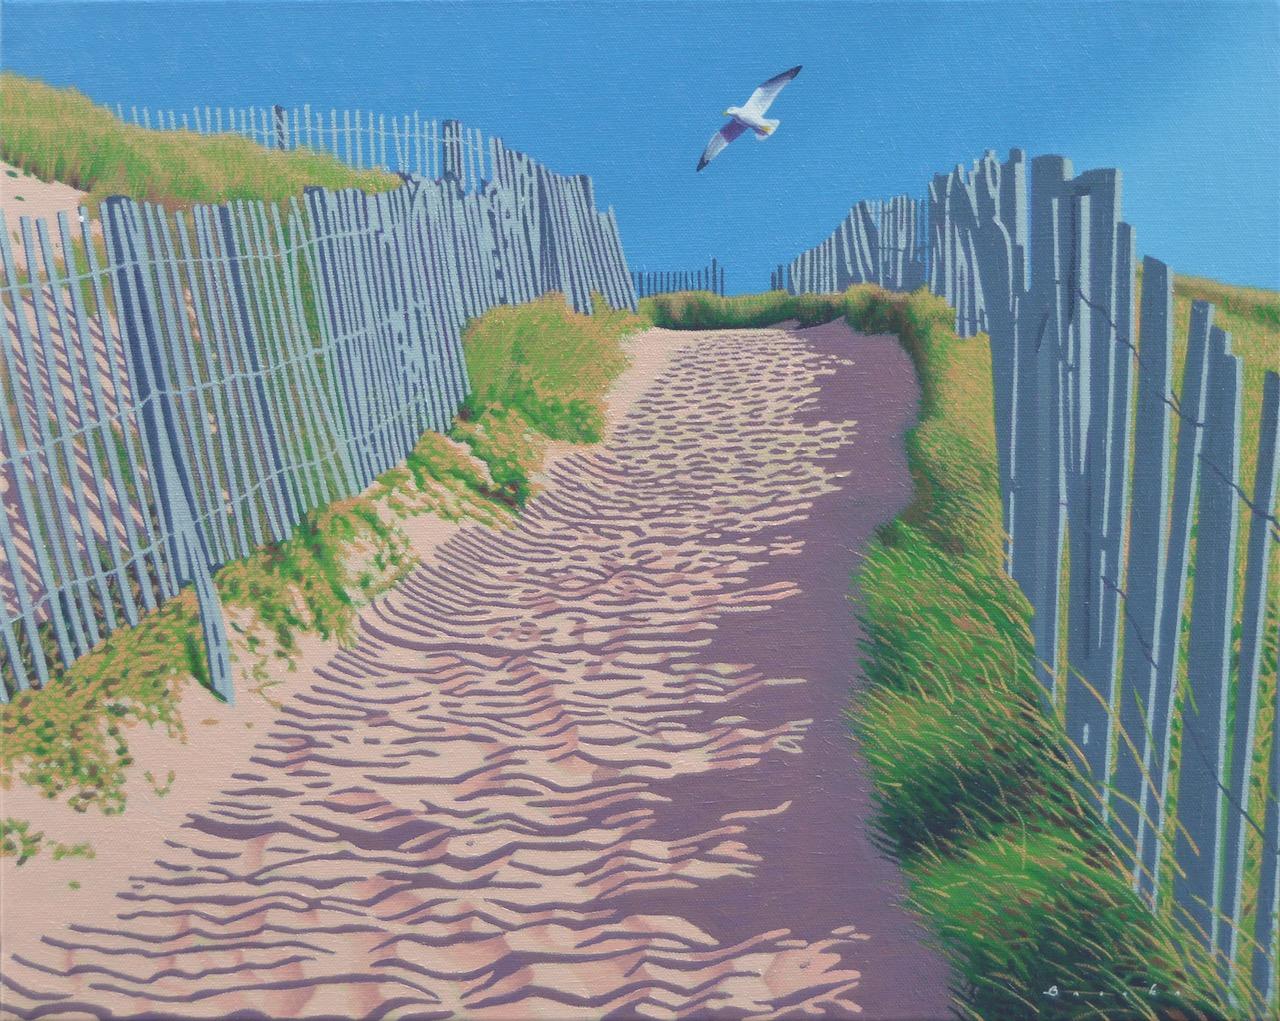 Rob Brooks Landscape Painting - "Beach Path" oil painting of trail leading to the beach with a bird and blue sky